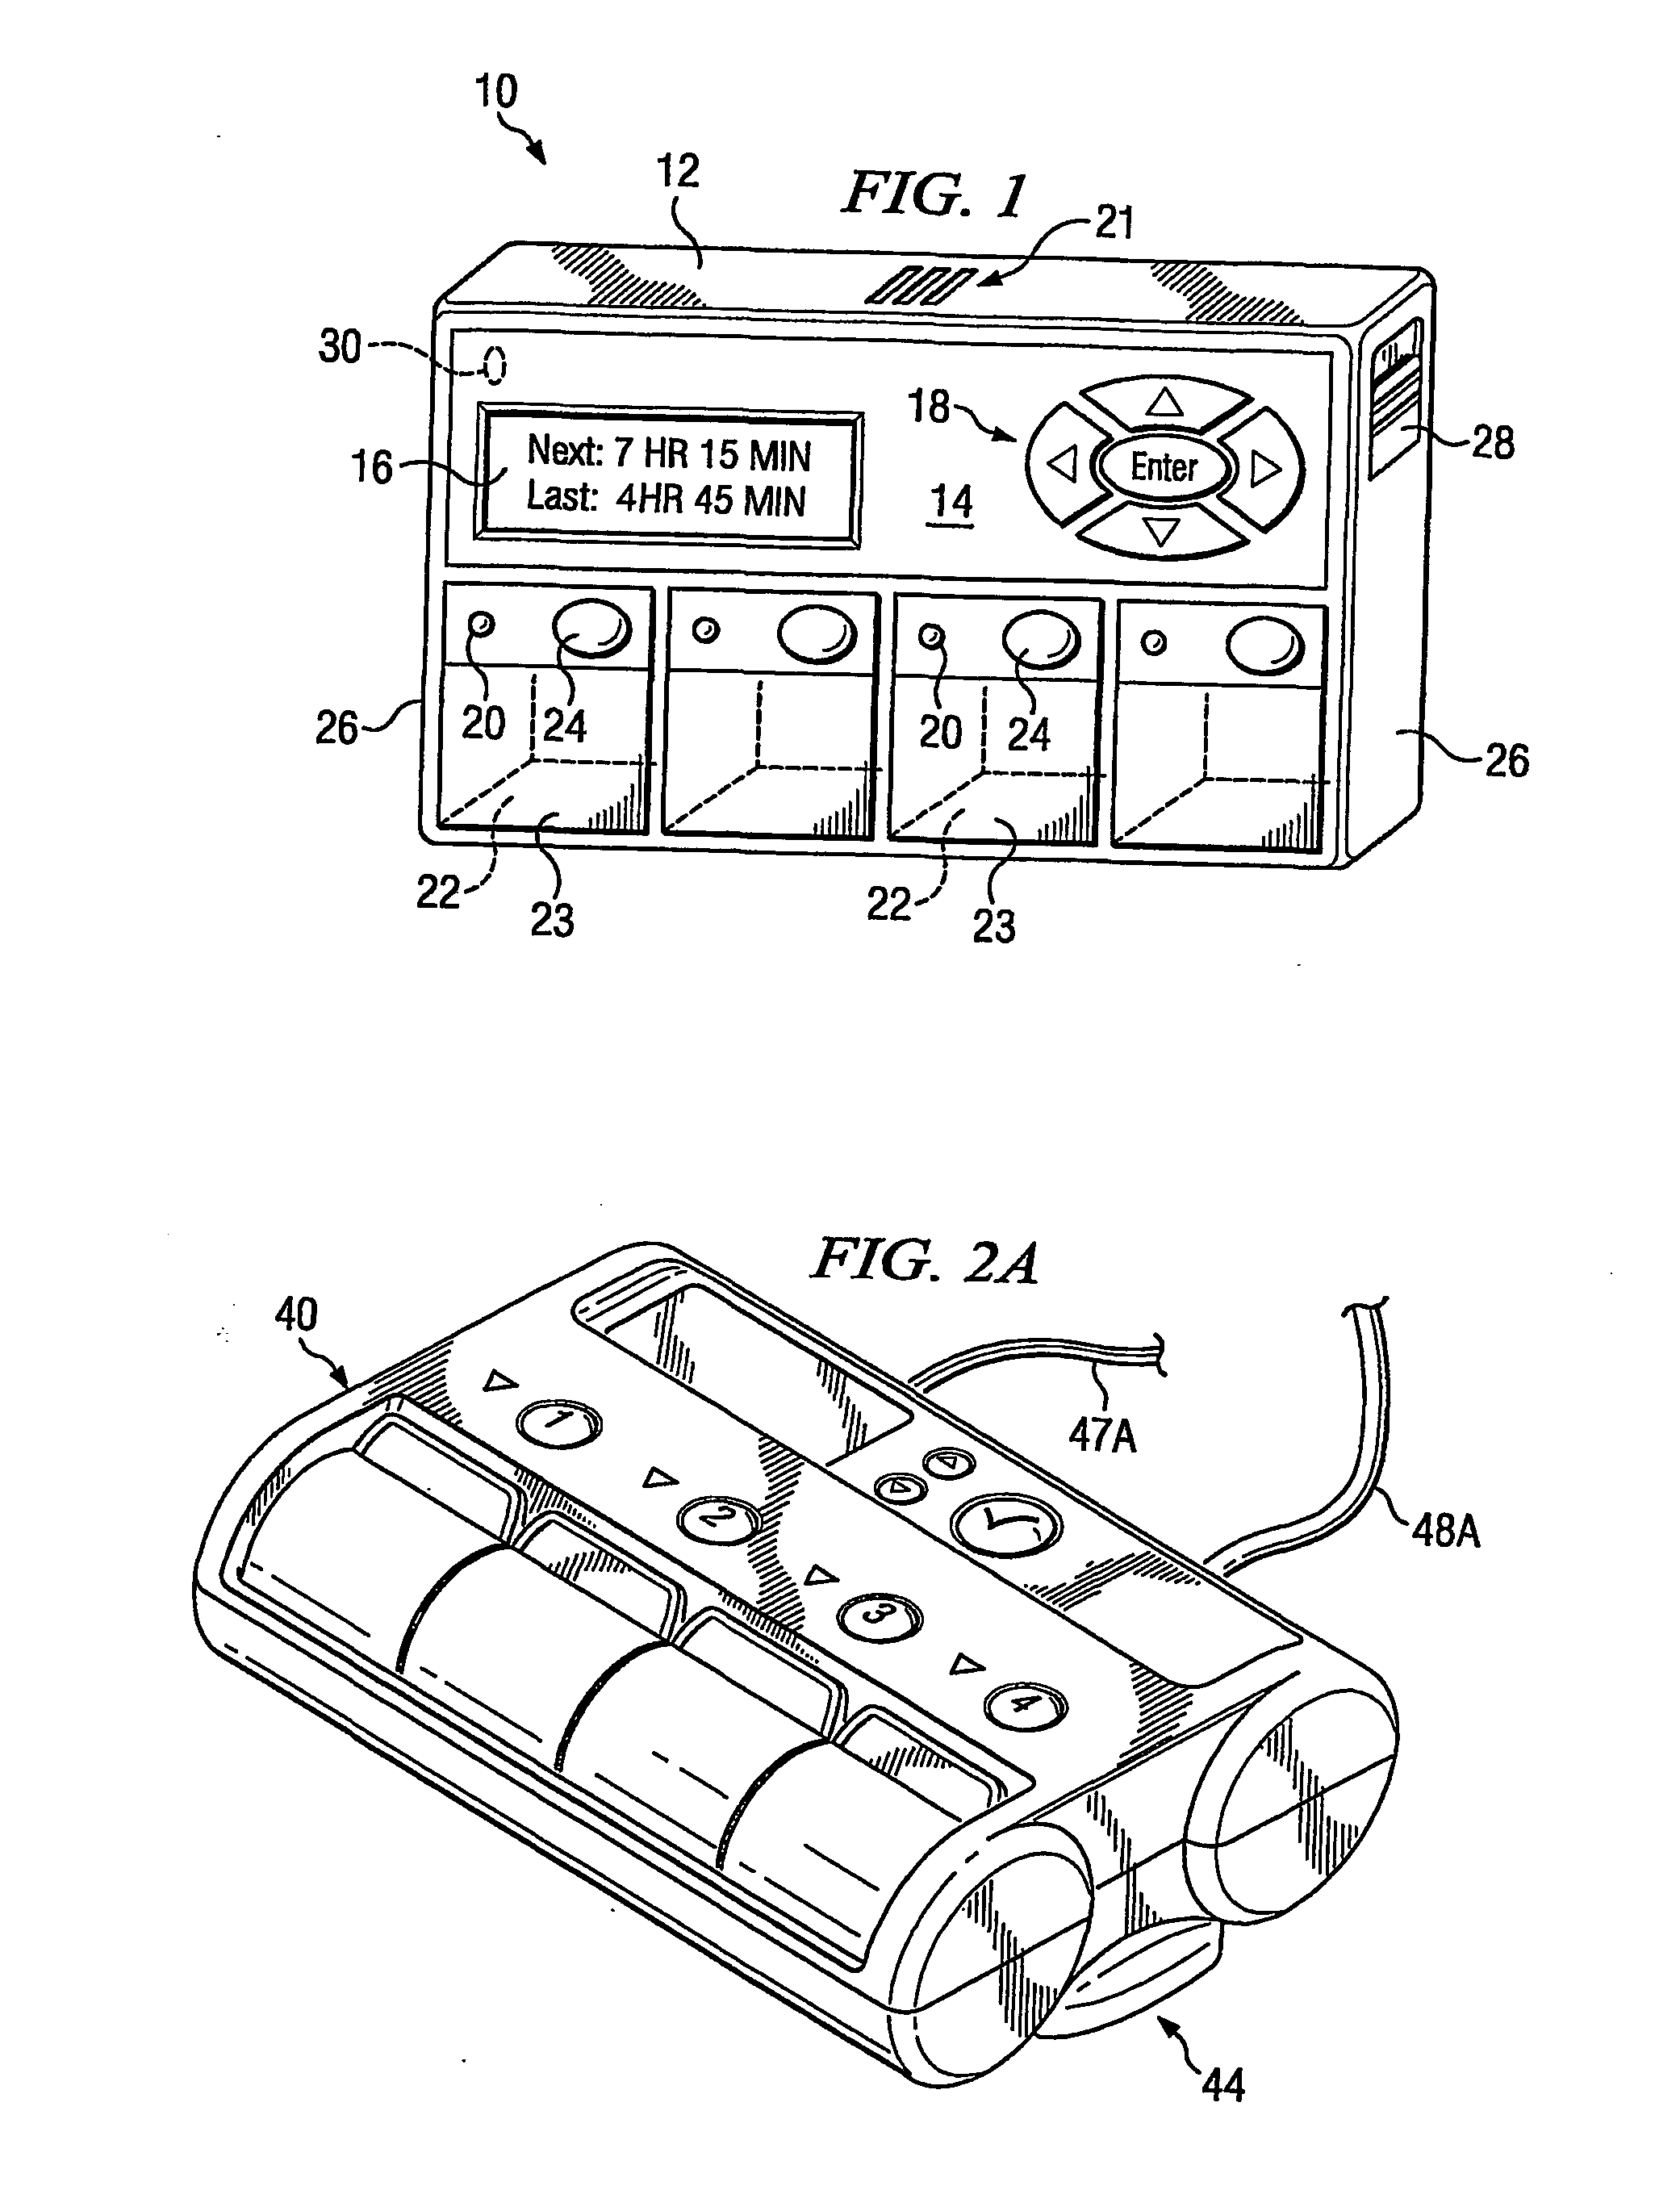 Medication compliance device